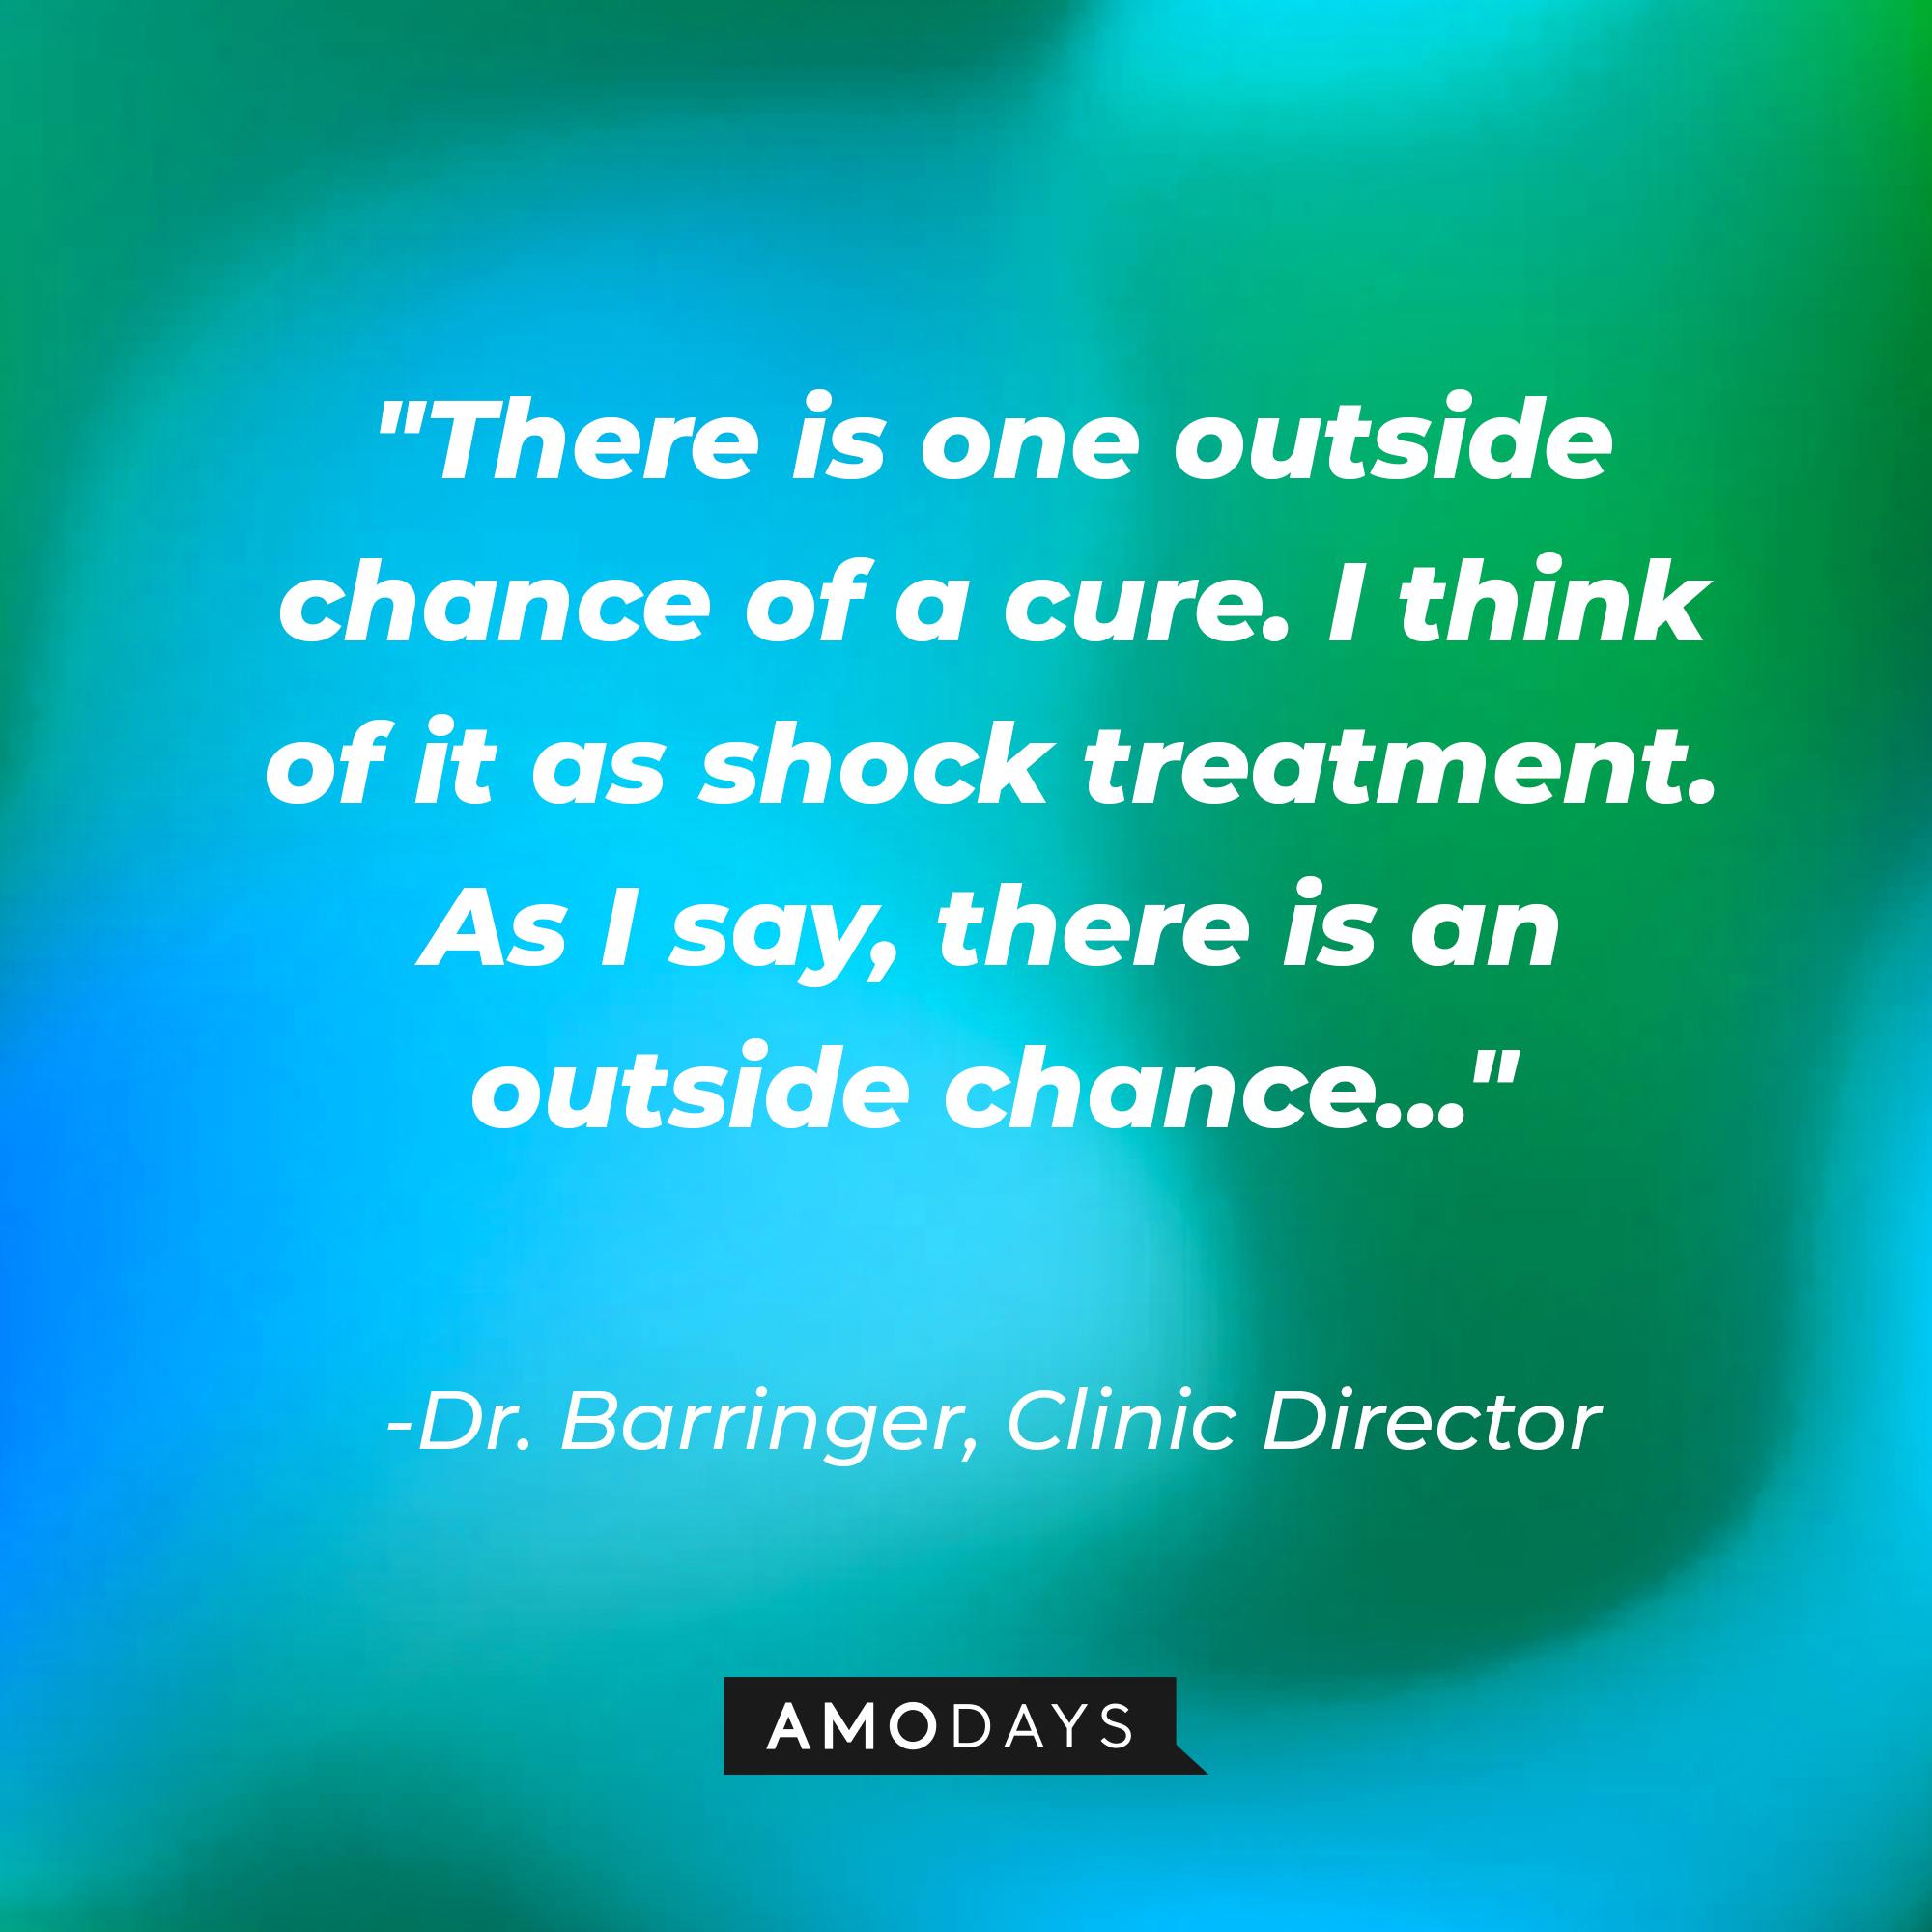 Clinic Director Dr. Barringer's quote: "There is one outside chance of a cure. I think of it as shock treatment. As I say, there is an outside chance..." | Source: AmoDAys